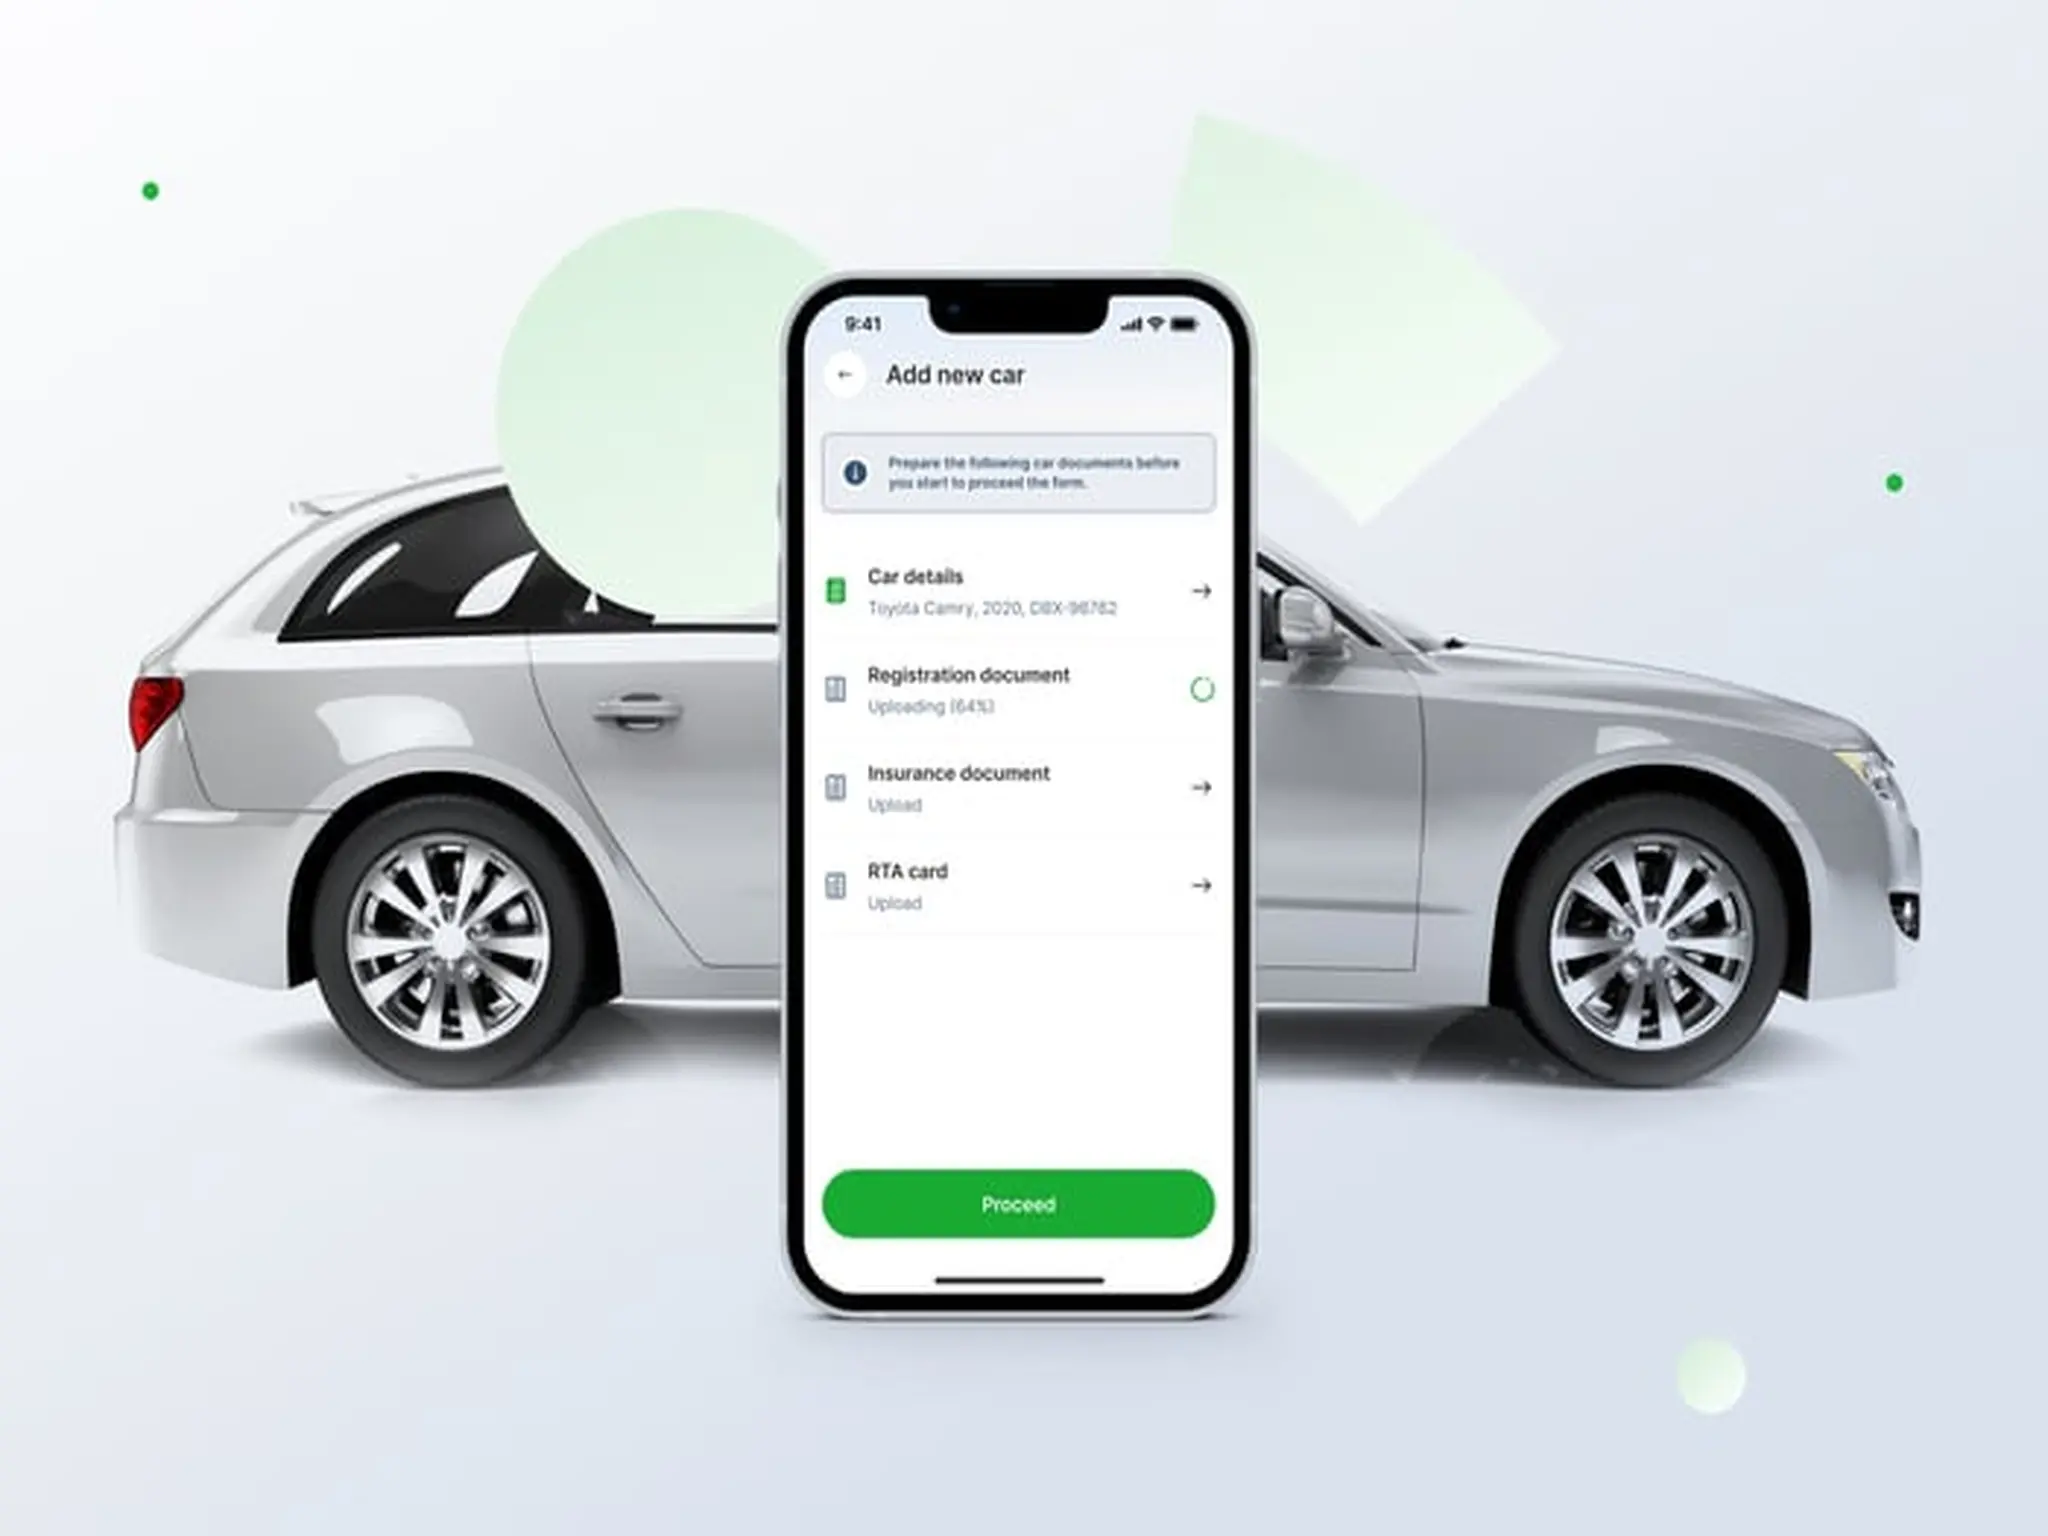 Have you seen the most recent Careem update?